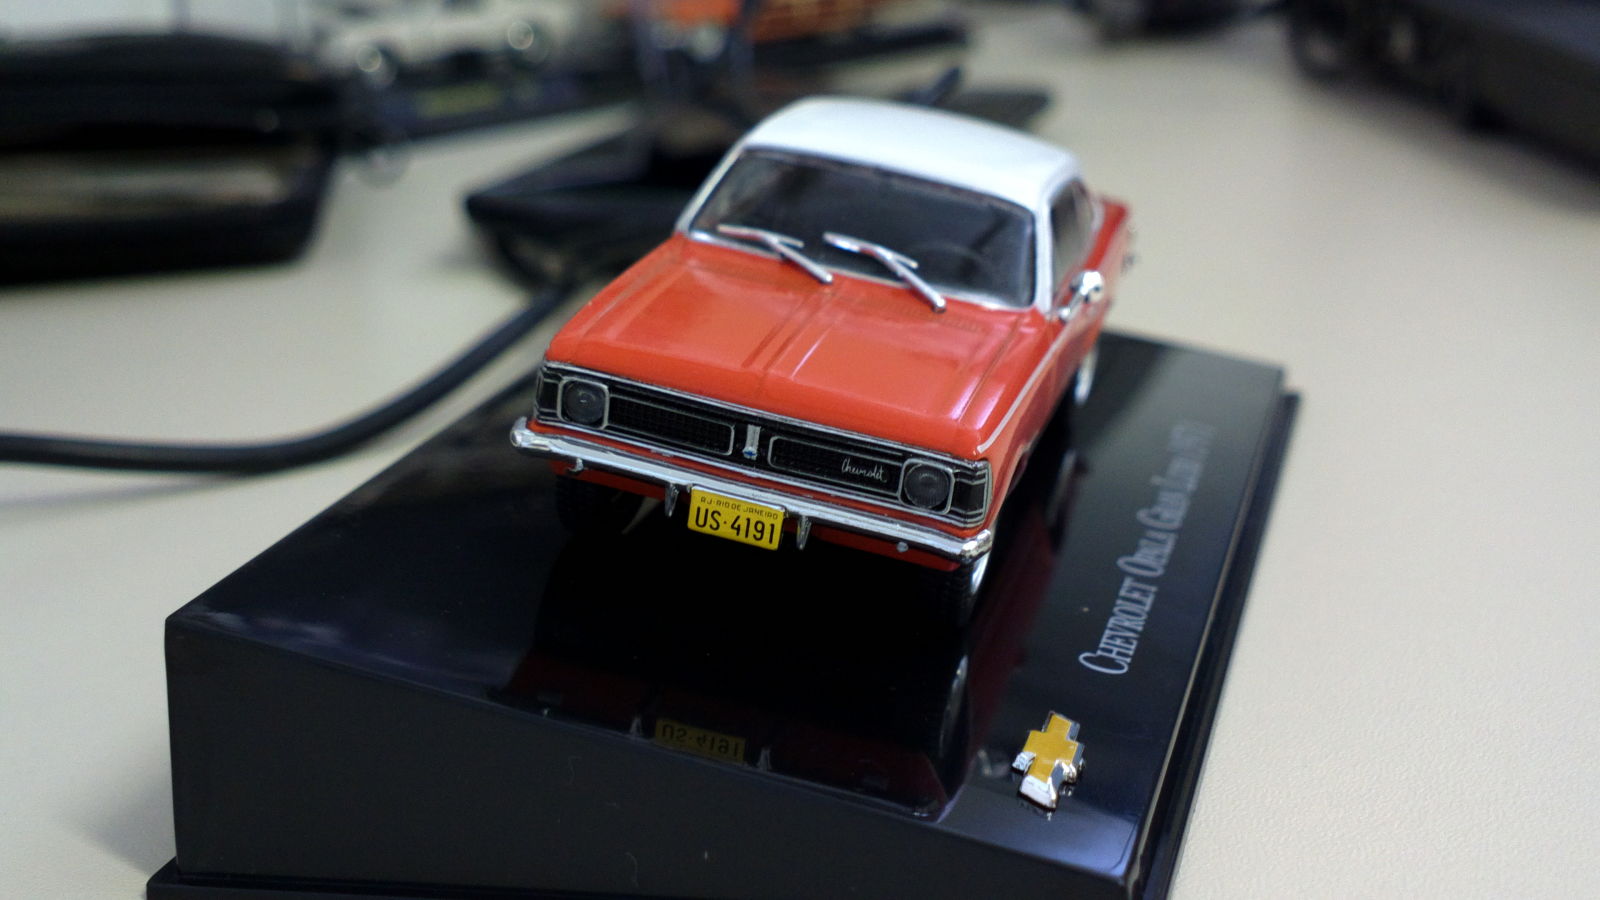 Illustration for article titled 1/43 HAWL - 1971 Chevrolet Opala Gran Luxo